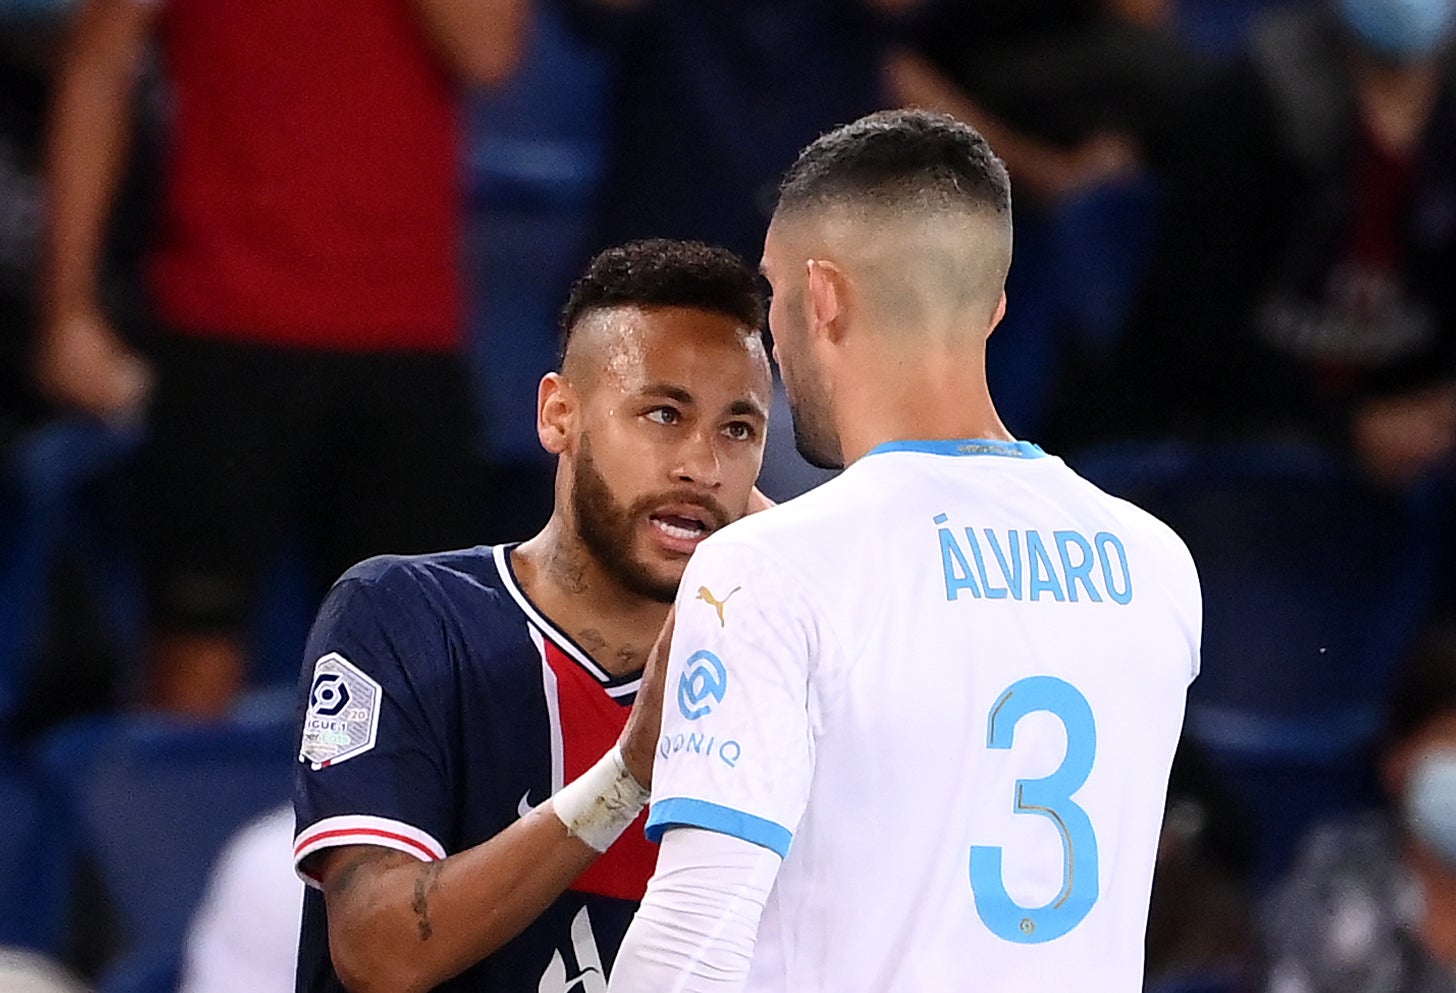 Neymar has been banned for two games while Marseille's Alvaro faces an investigation for alleged racist language